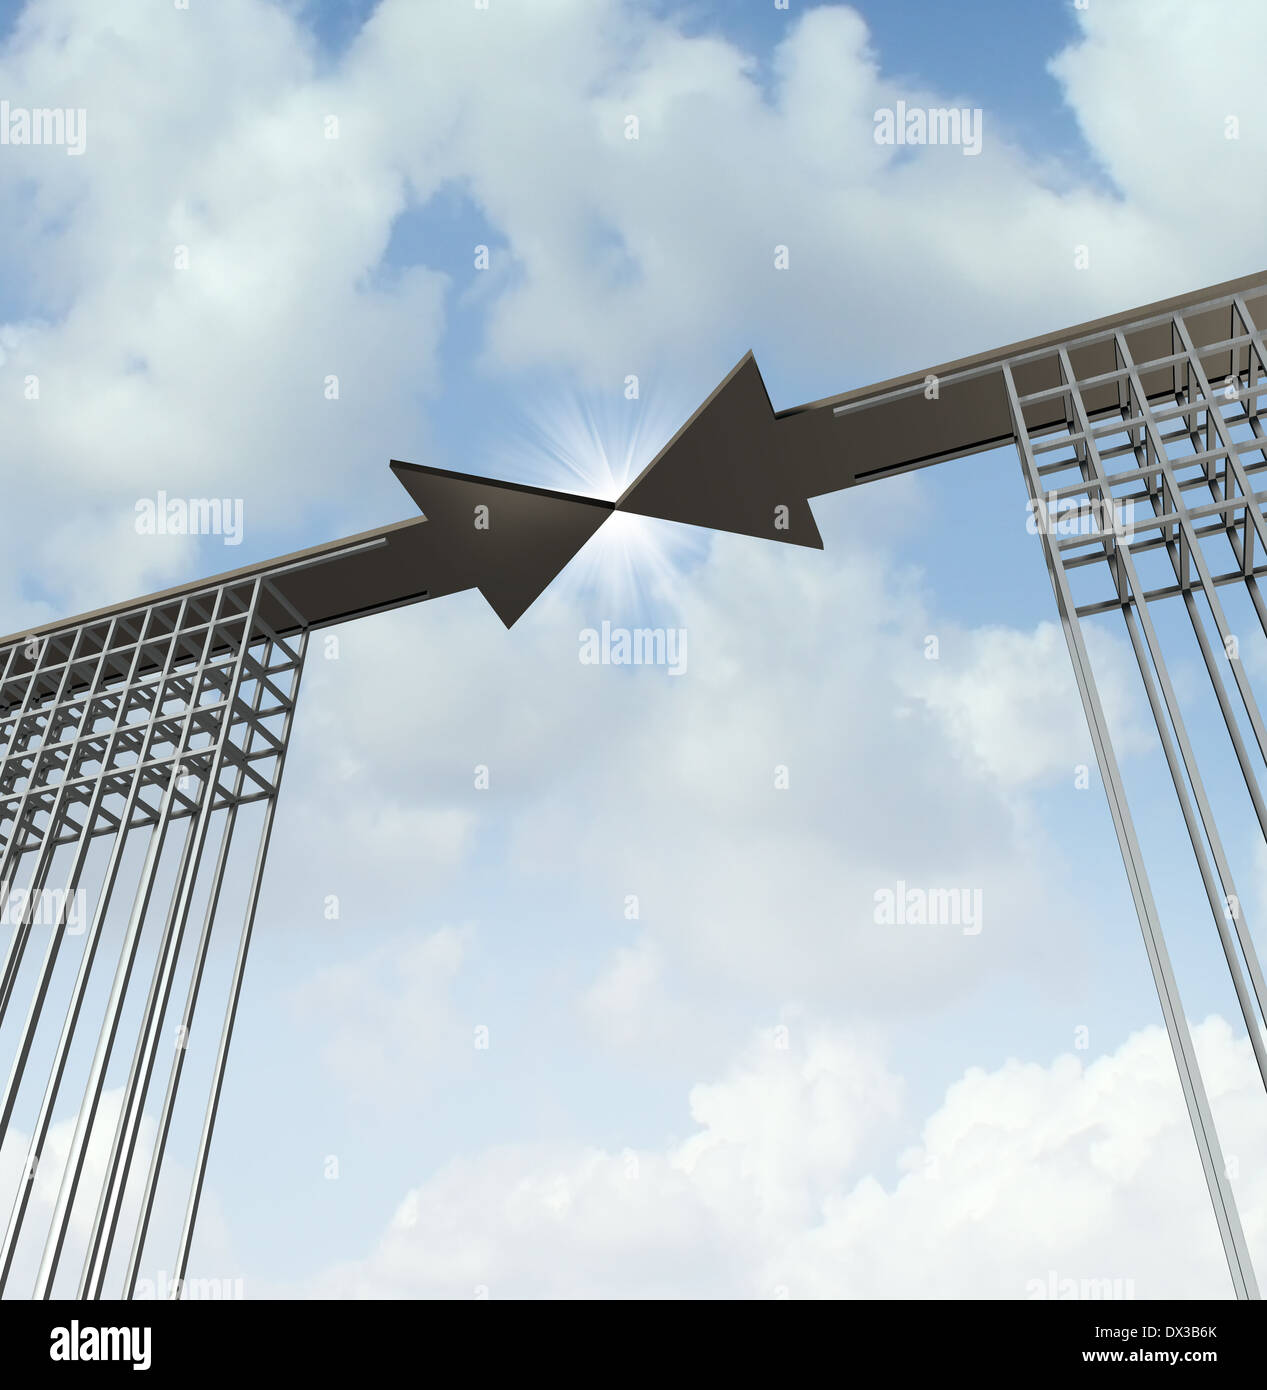 Business meeting concept as a top level agreement metaphor with two arrow shaped roads on bridges coming together in a global partnership and to create a new financial trade path to success between two leaders. Stock Photo